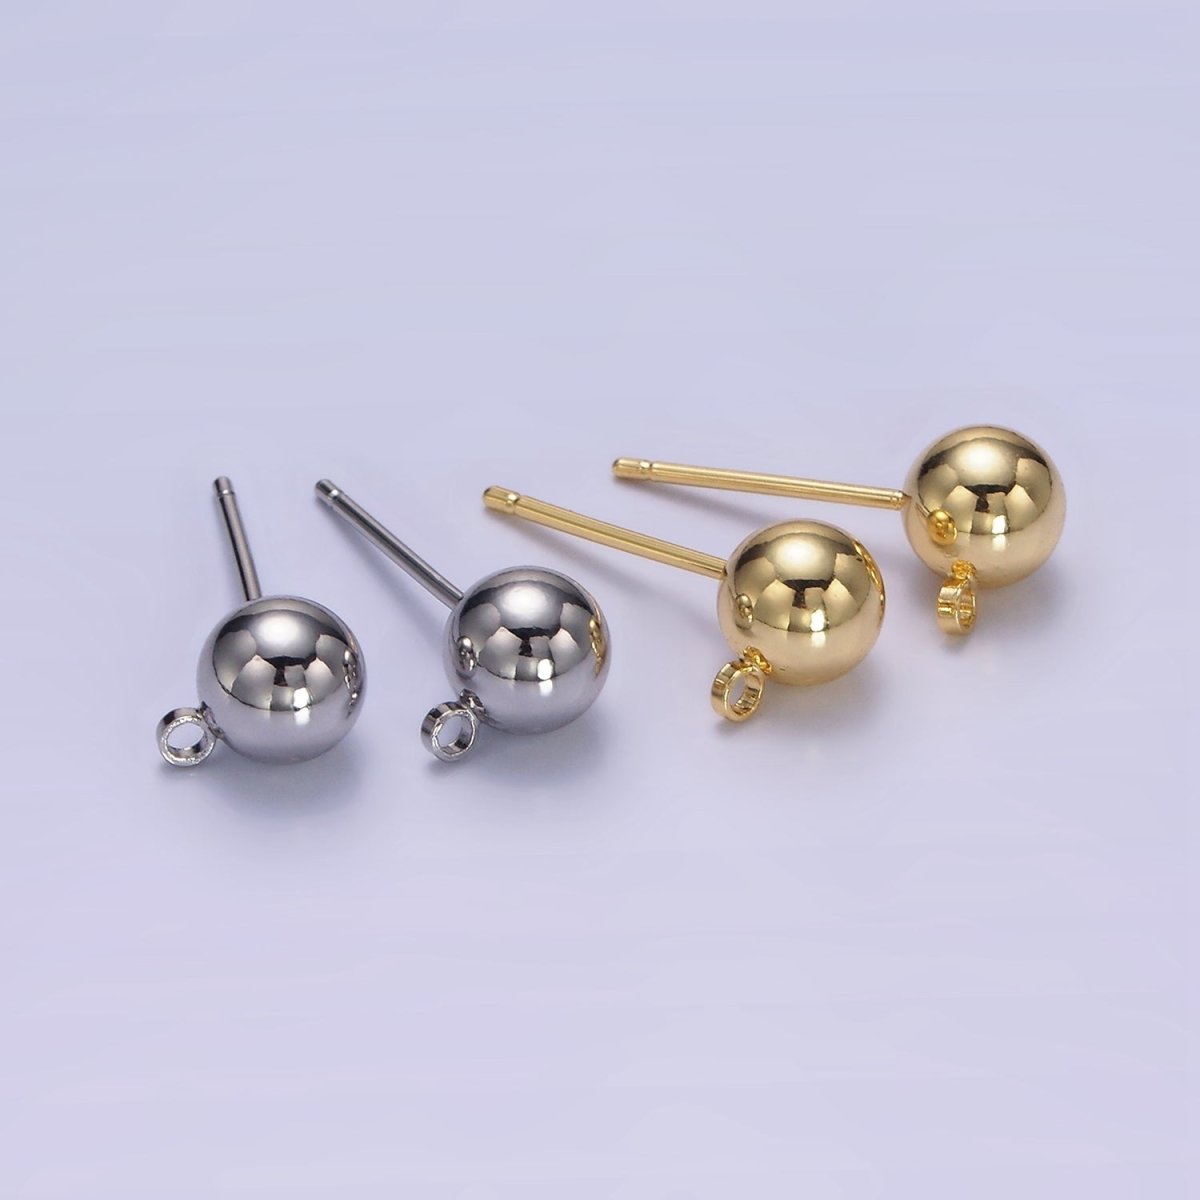 1 pair 3,5,6mm Small Ball Stud Earrings Ball 14K Gold Filled Post Earring with Closed Loop for Earring Supply Z-673 Z-678 - DLUXCA